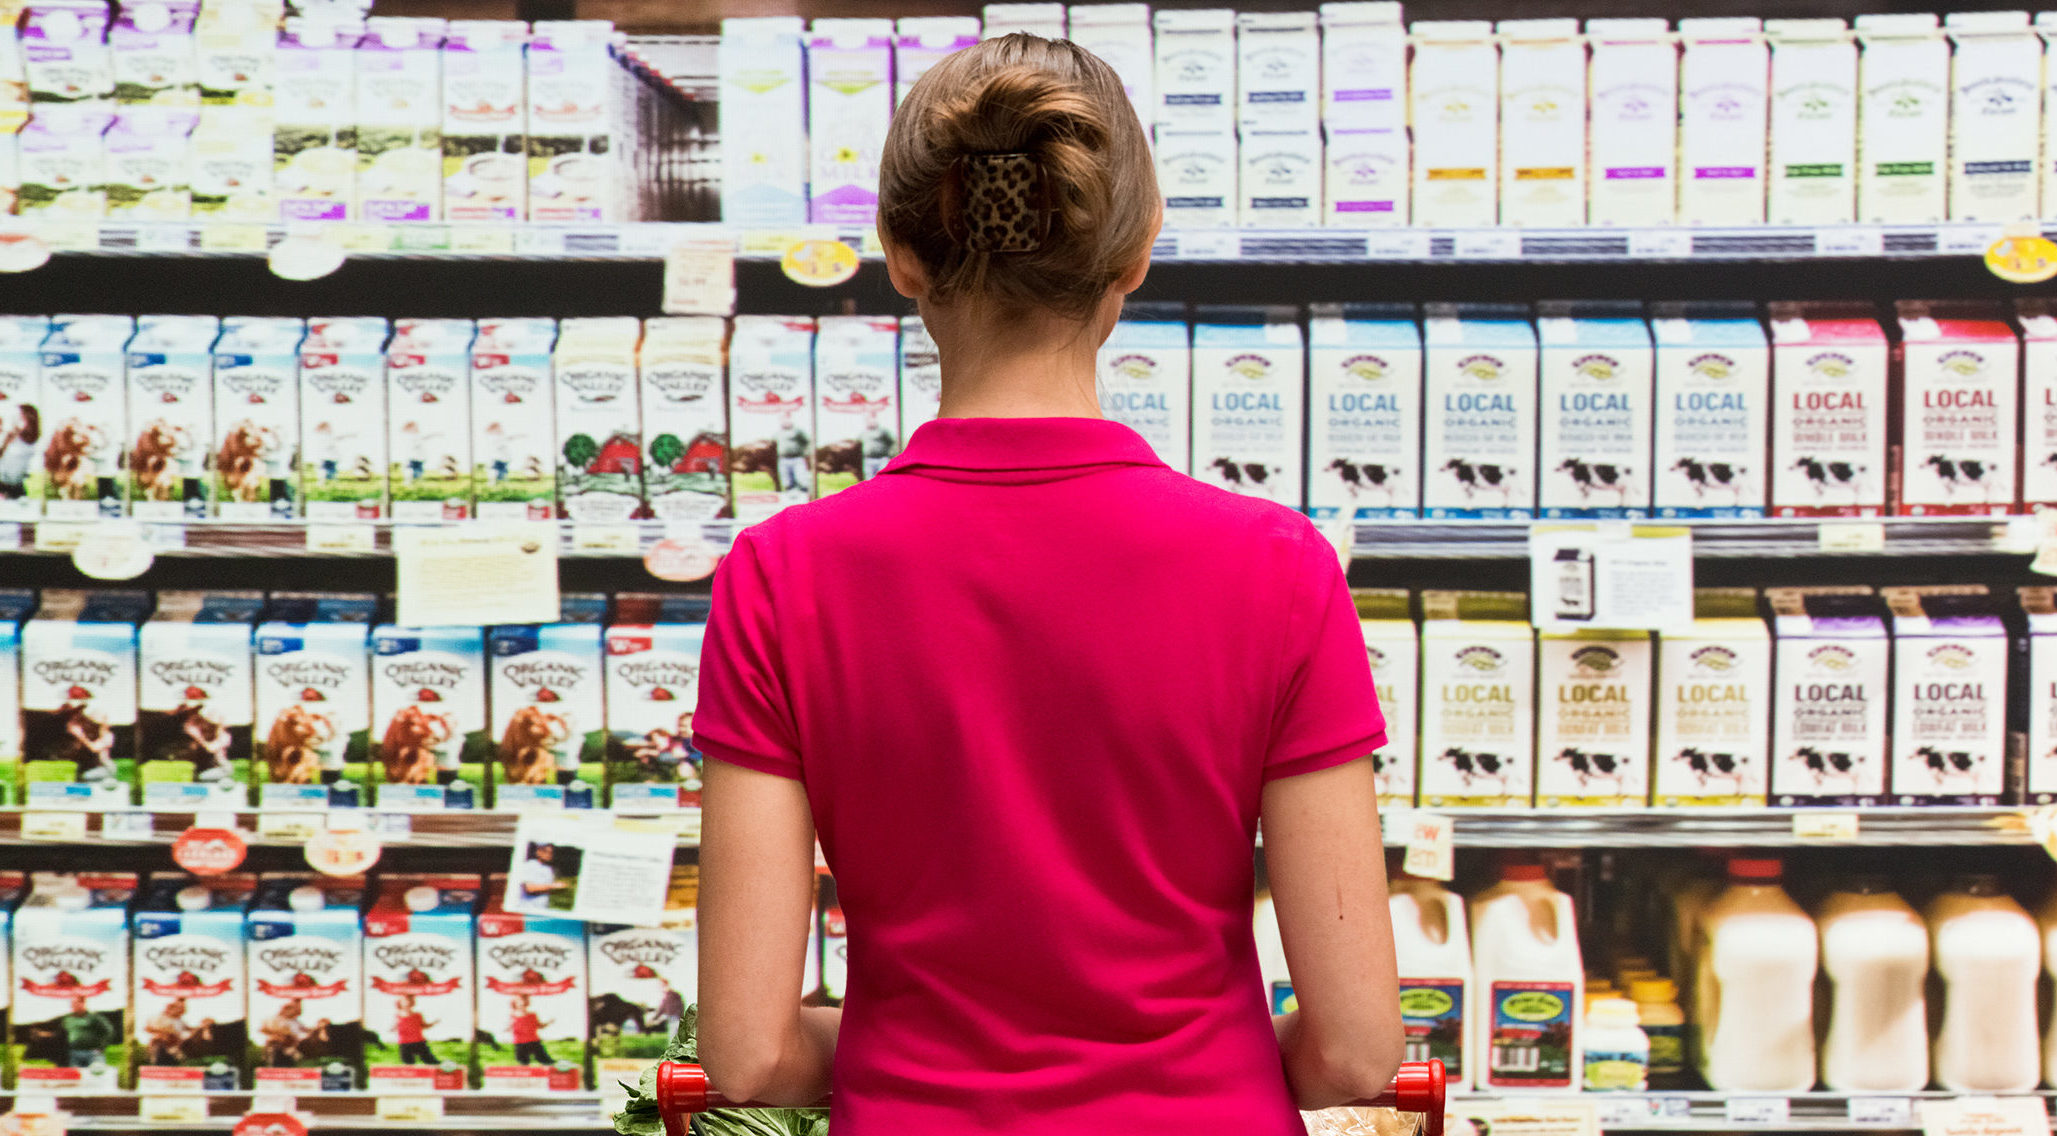 Customer in supermarket, from behind while she looks at shelves of milk in cartons and jugs